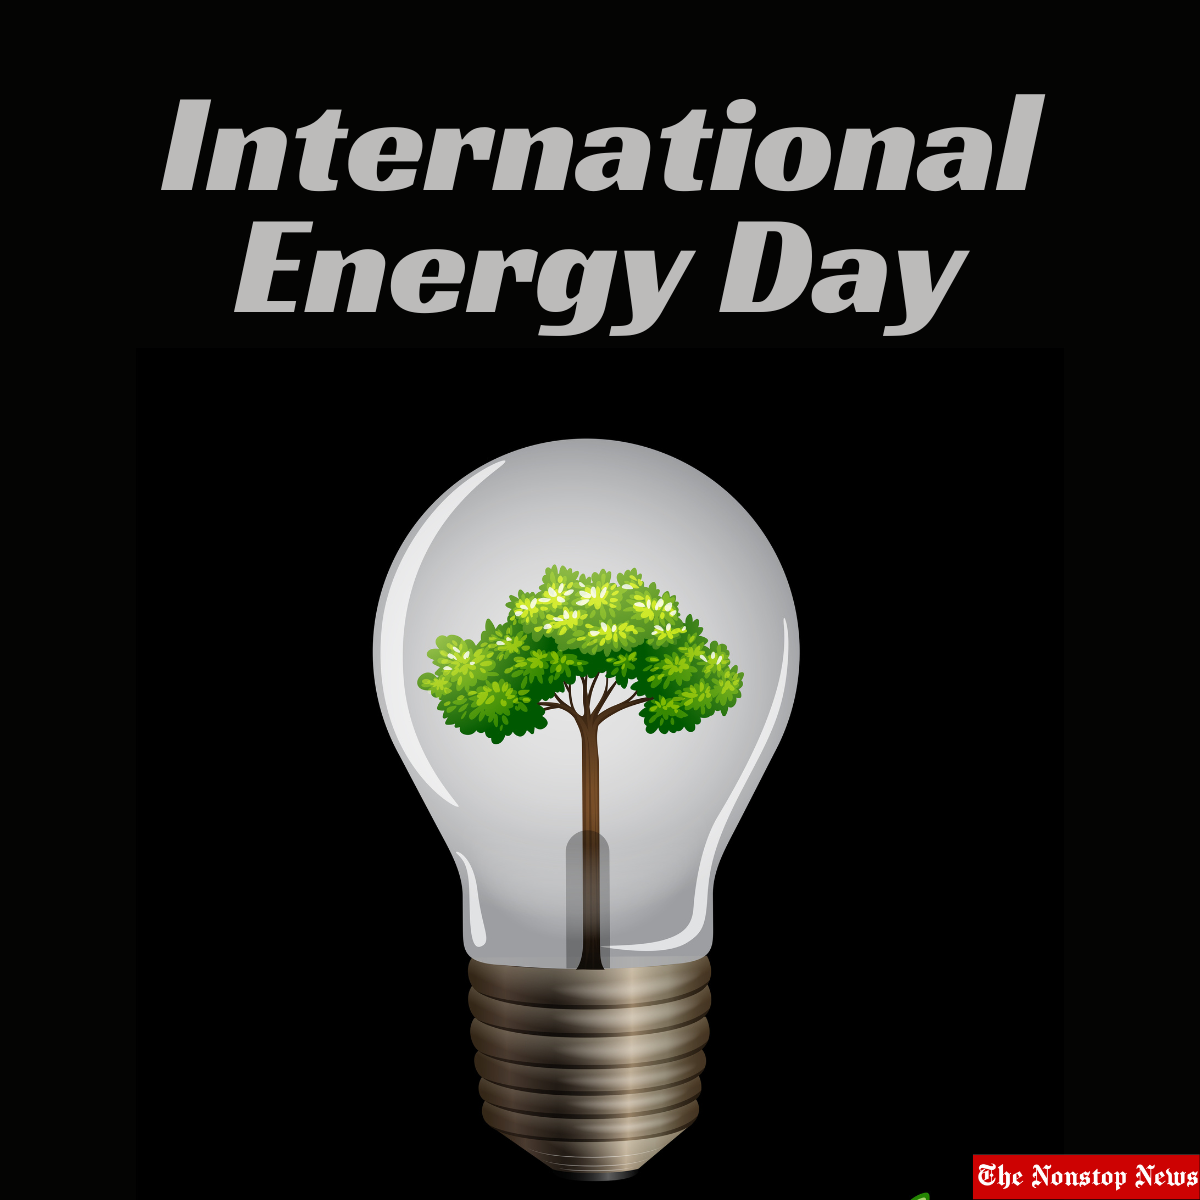 International Energy Day 2022 Theme, Quotes, Slogans, Messages, HD Images, Posters, Banners, and Greetings to share